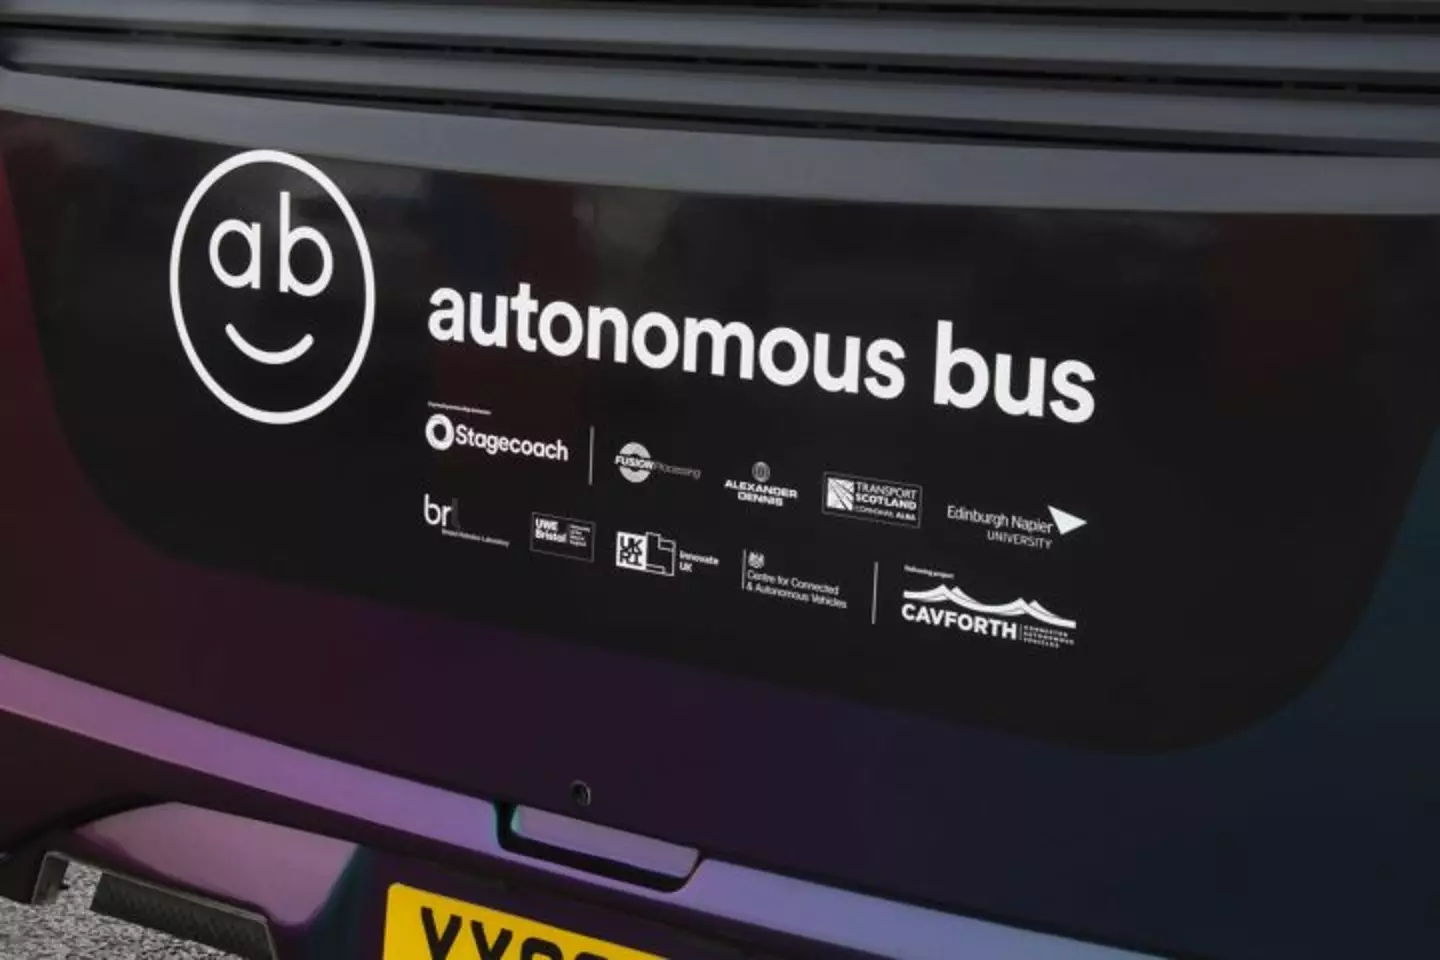 The autonomous buses will be launched in the summer if the trials go well.